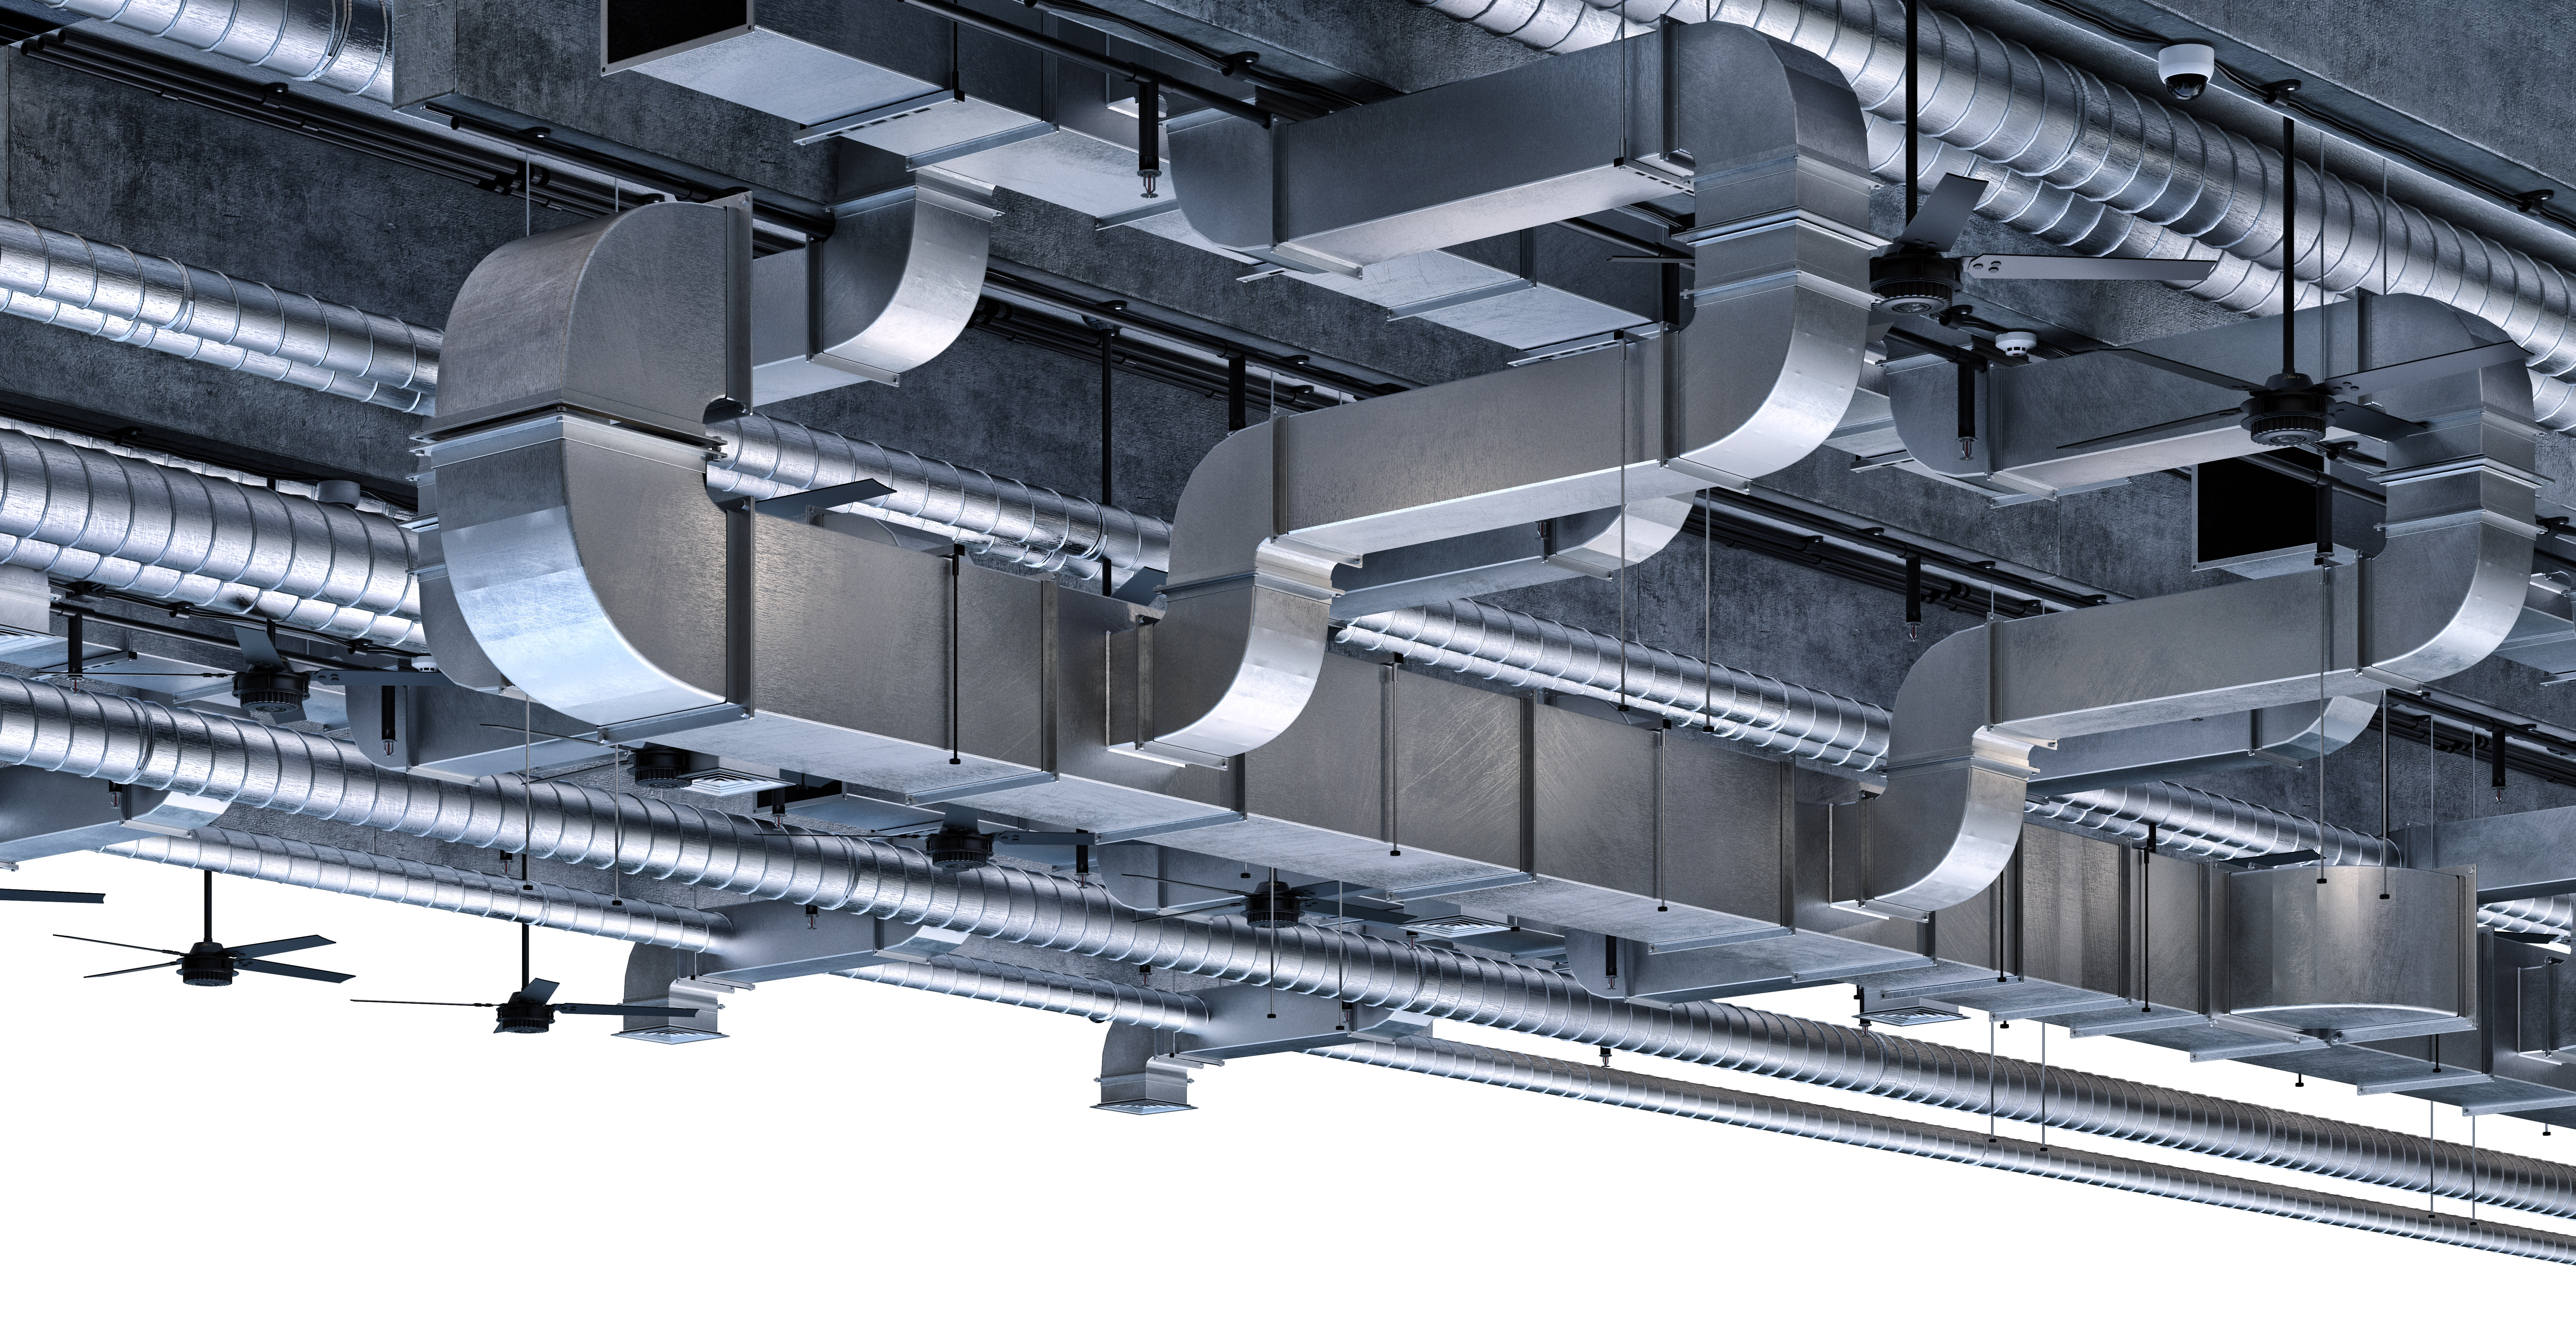 Example: Air ventilation pipes system hanging from the ceiling inside commercial building